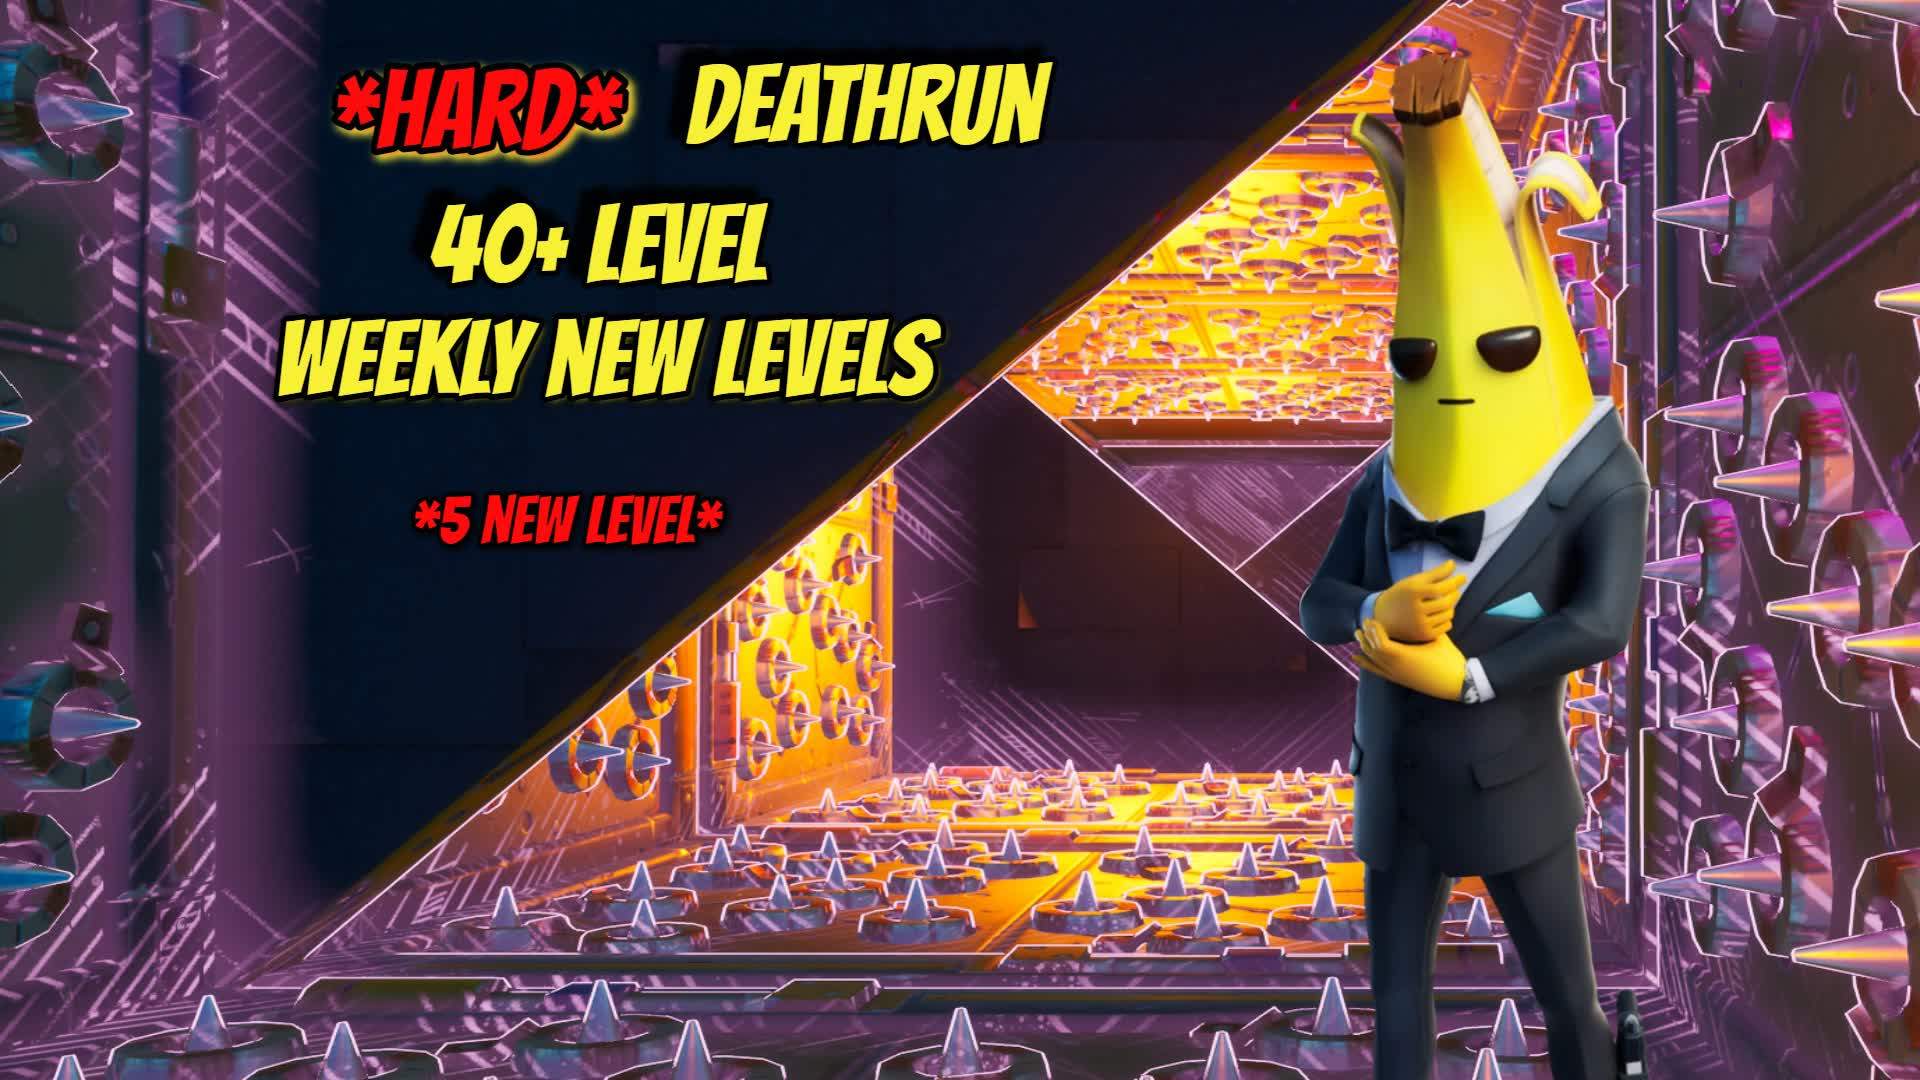 HARD NEON PARKOUR || New levels weekly